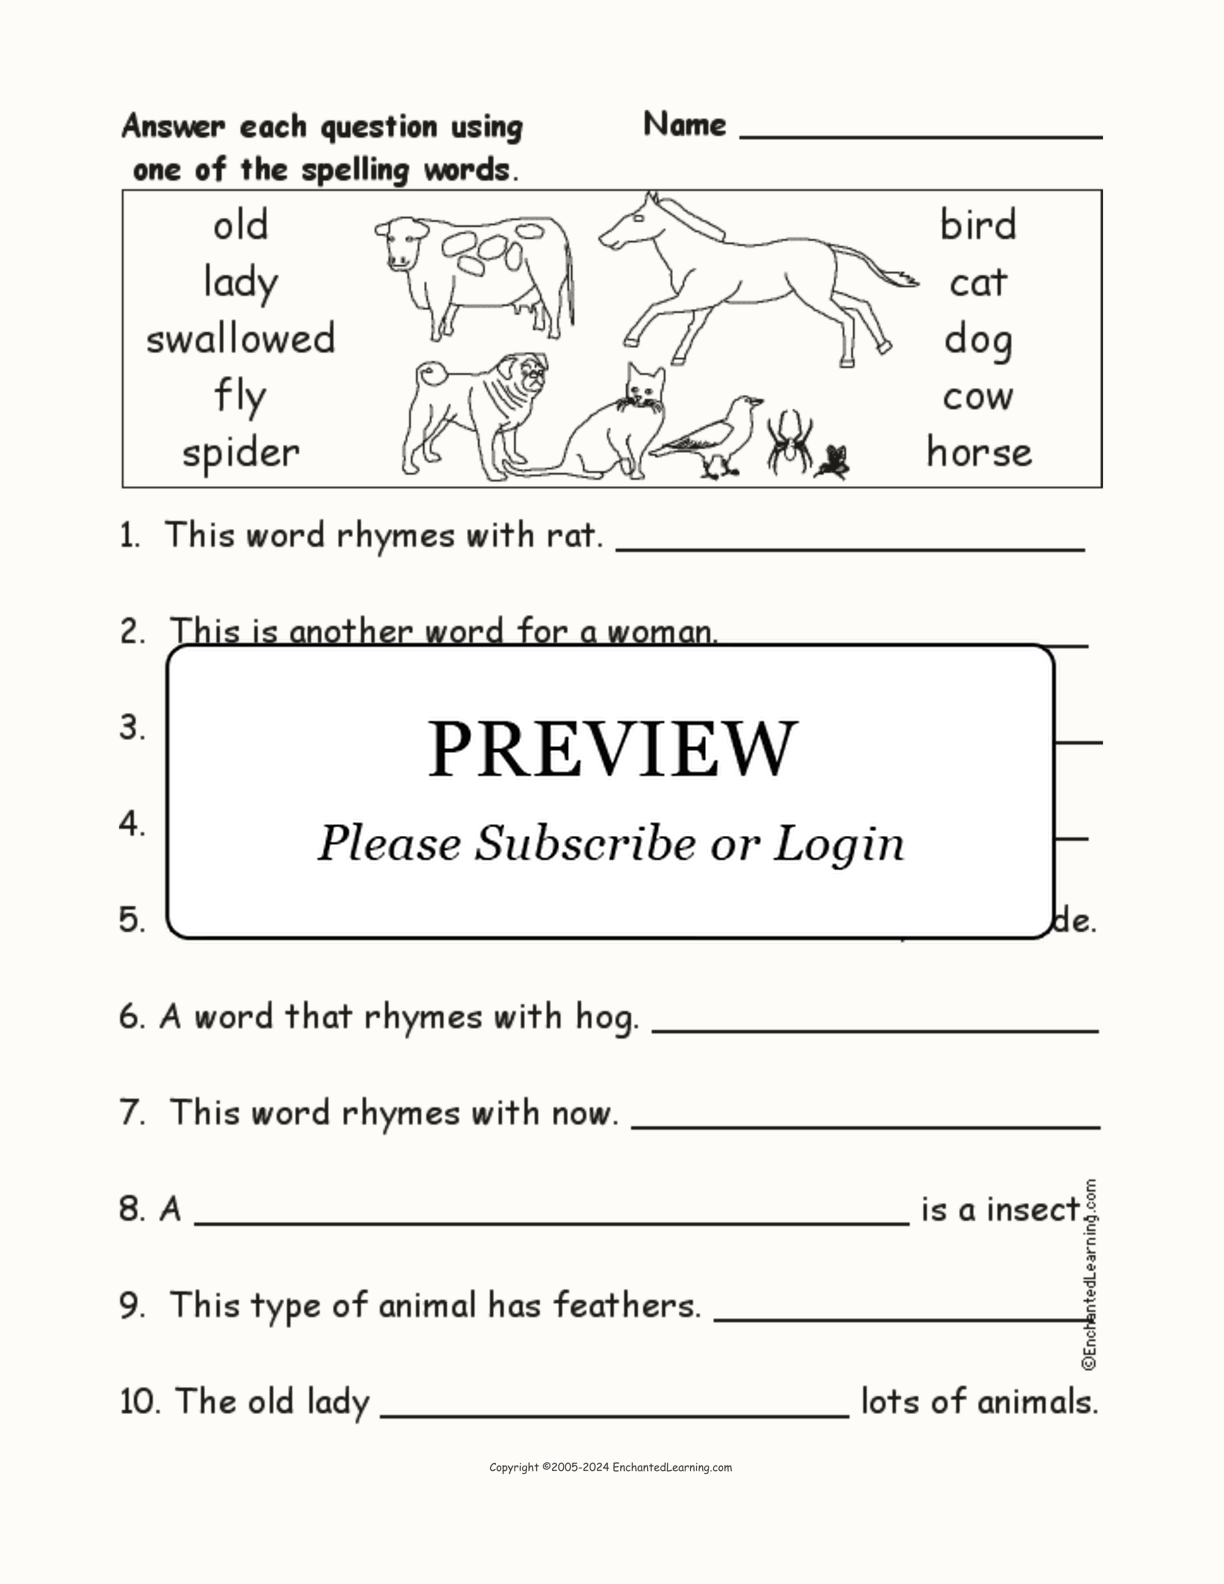 'The Old Lady and the Fly': Spelling Word Questions interactive worksheet page 1